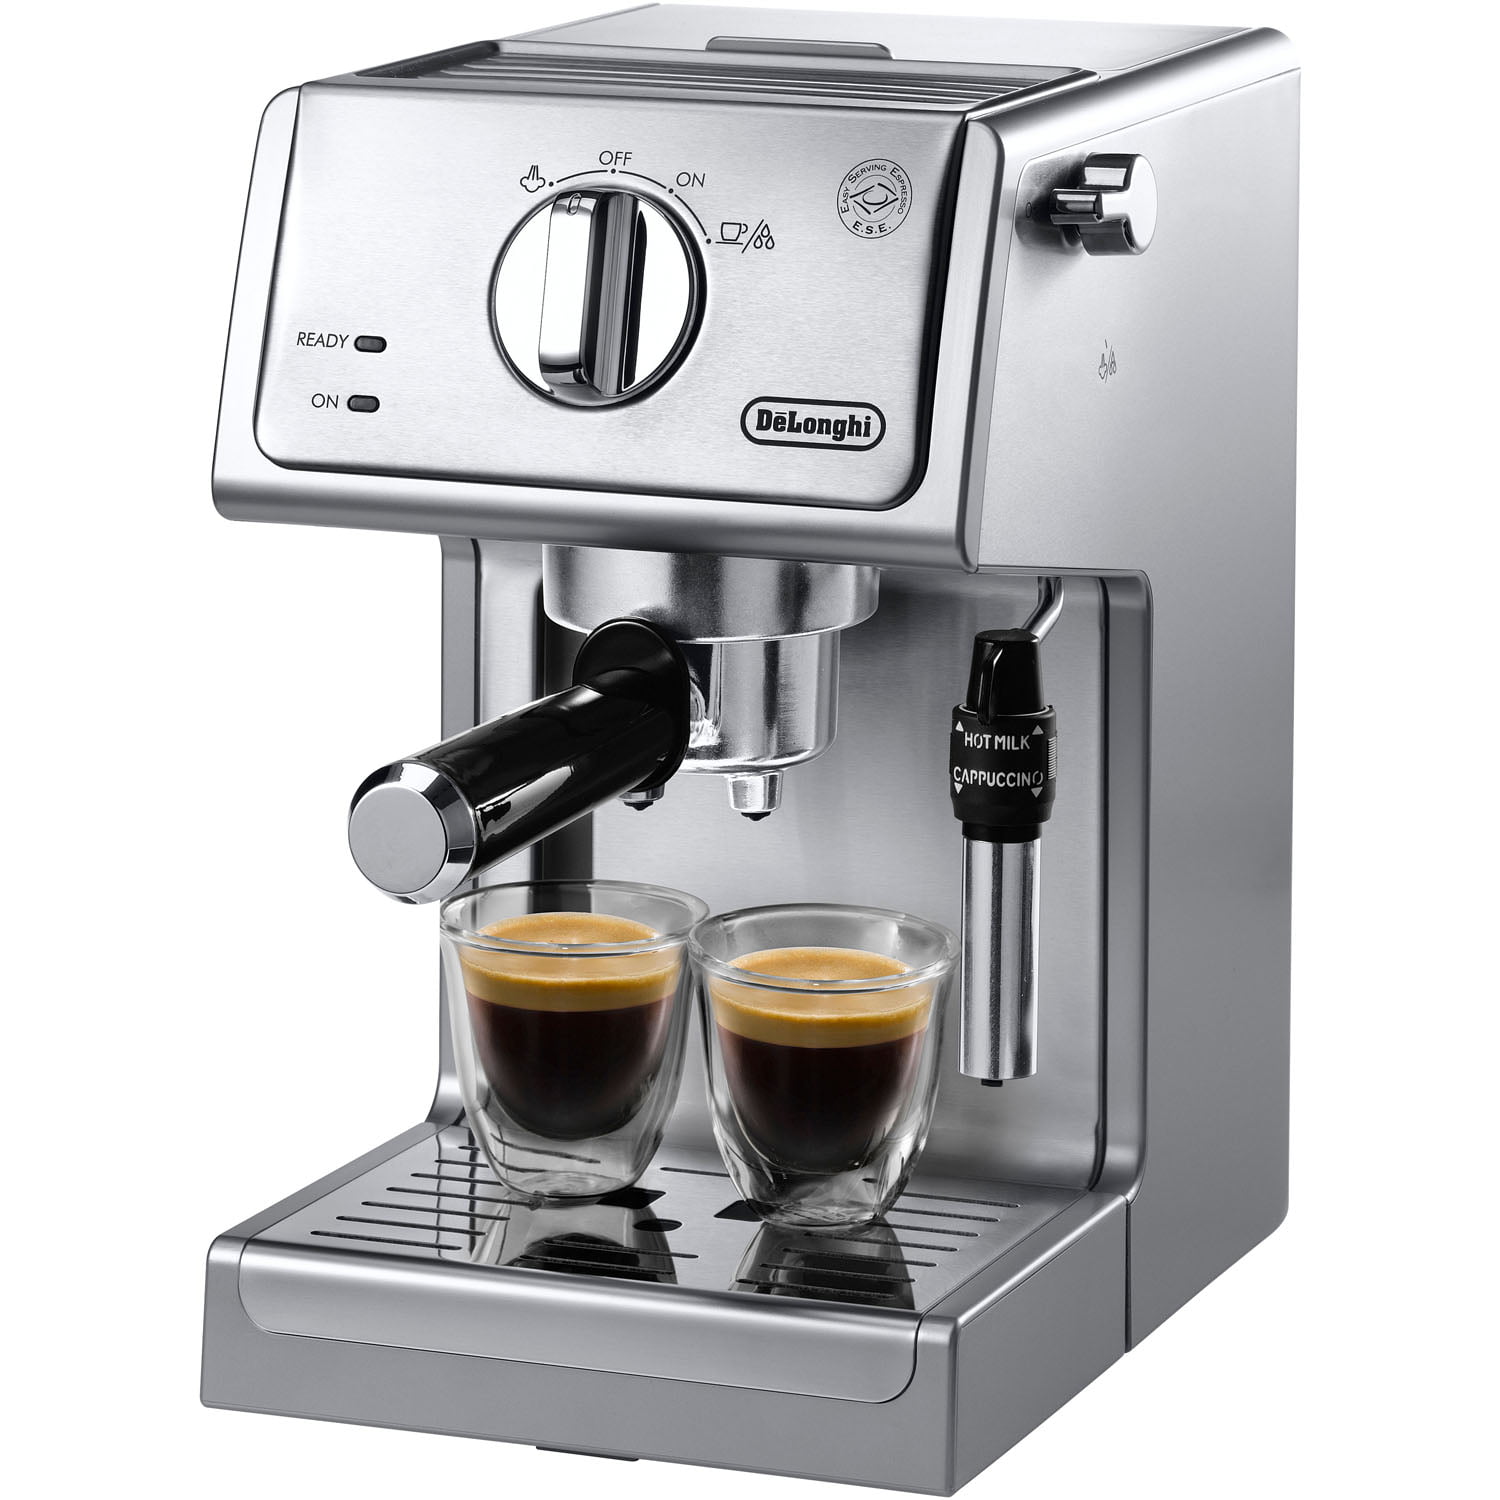 De'Longhi Ecp3630 15 Bar Espresso and Cappuccino Machine with Adjustable Advanced Cappuccino System $140.98 + Free Shipping